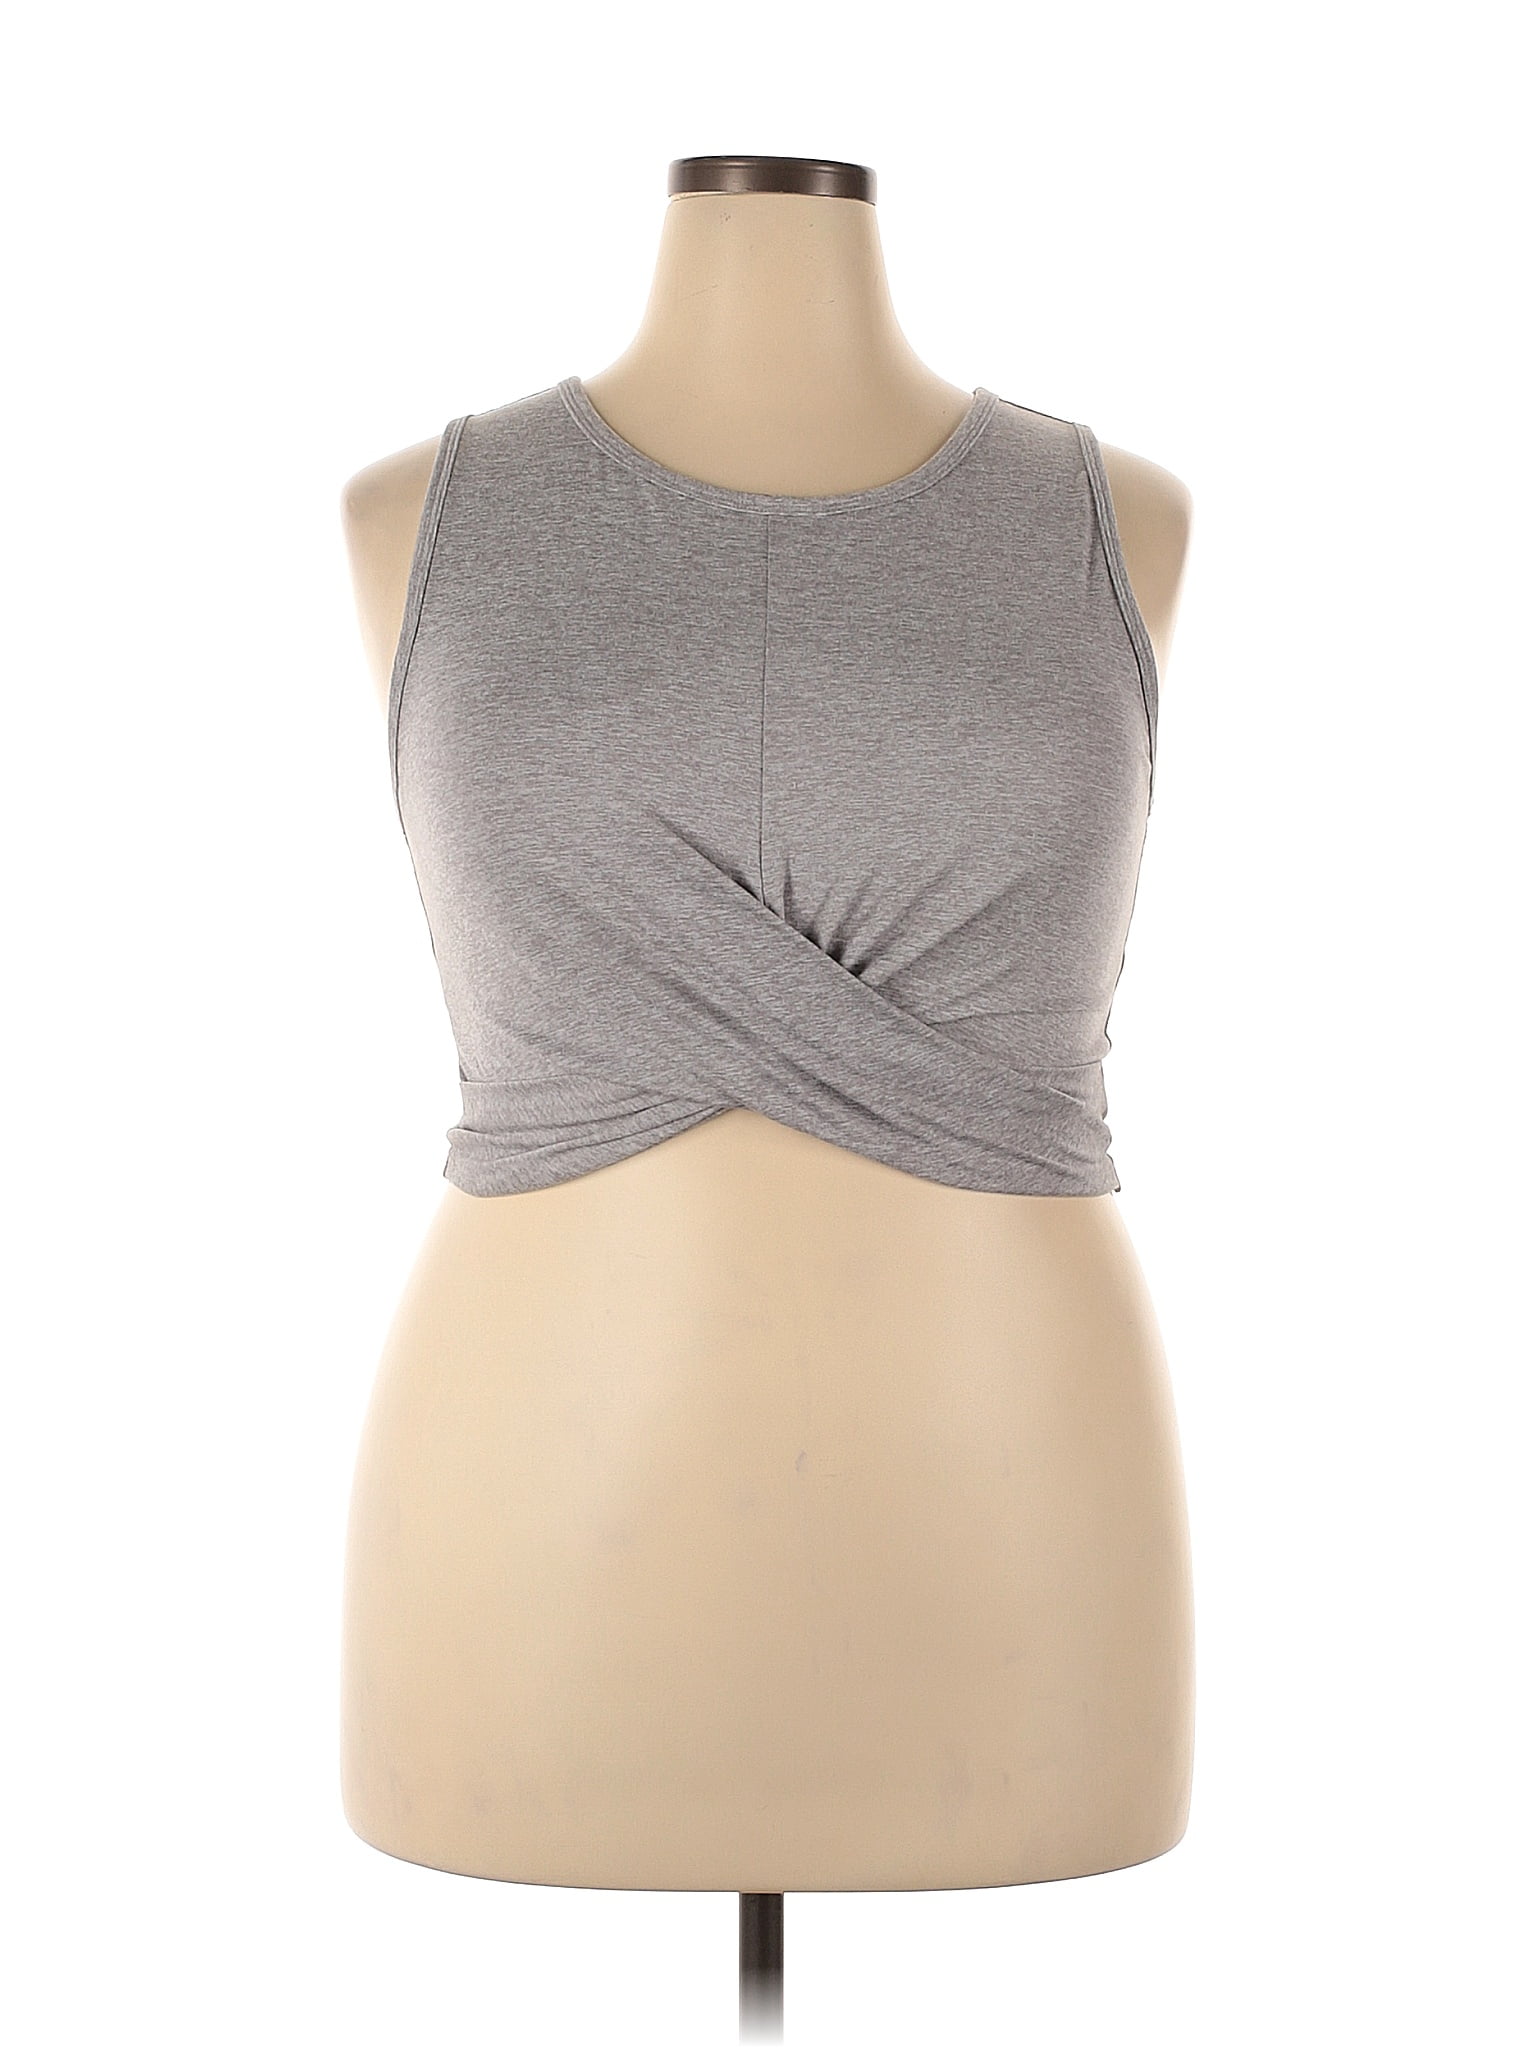 Yogalicious Womens Twisted Front Tank Top 